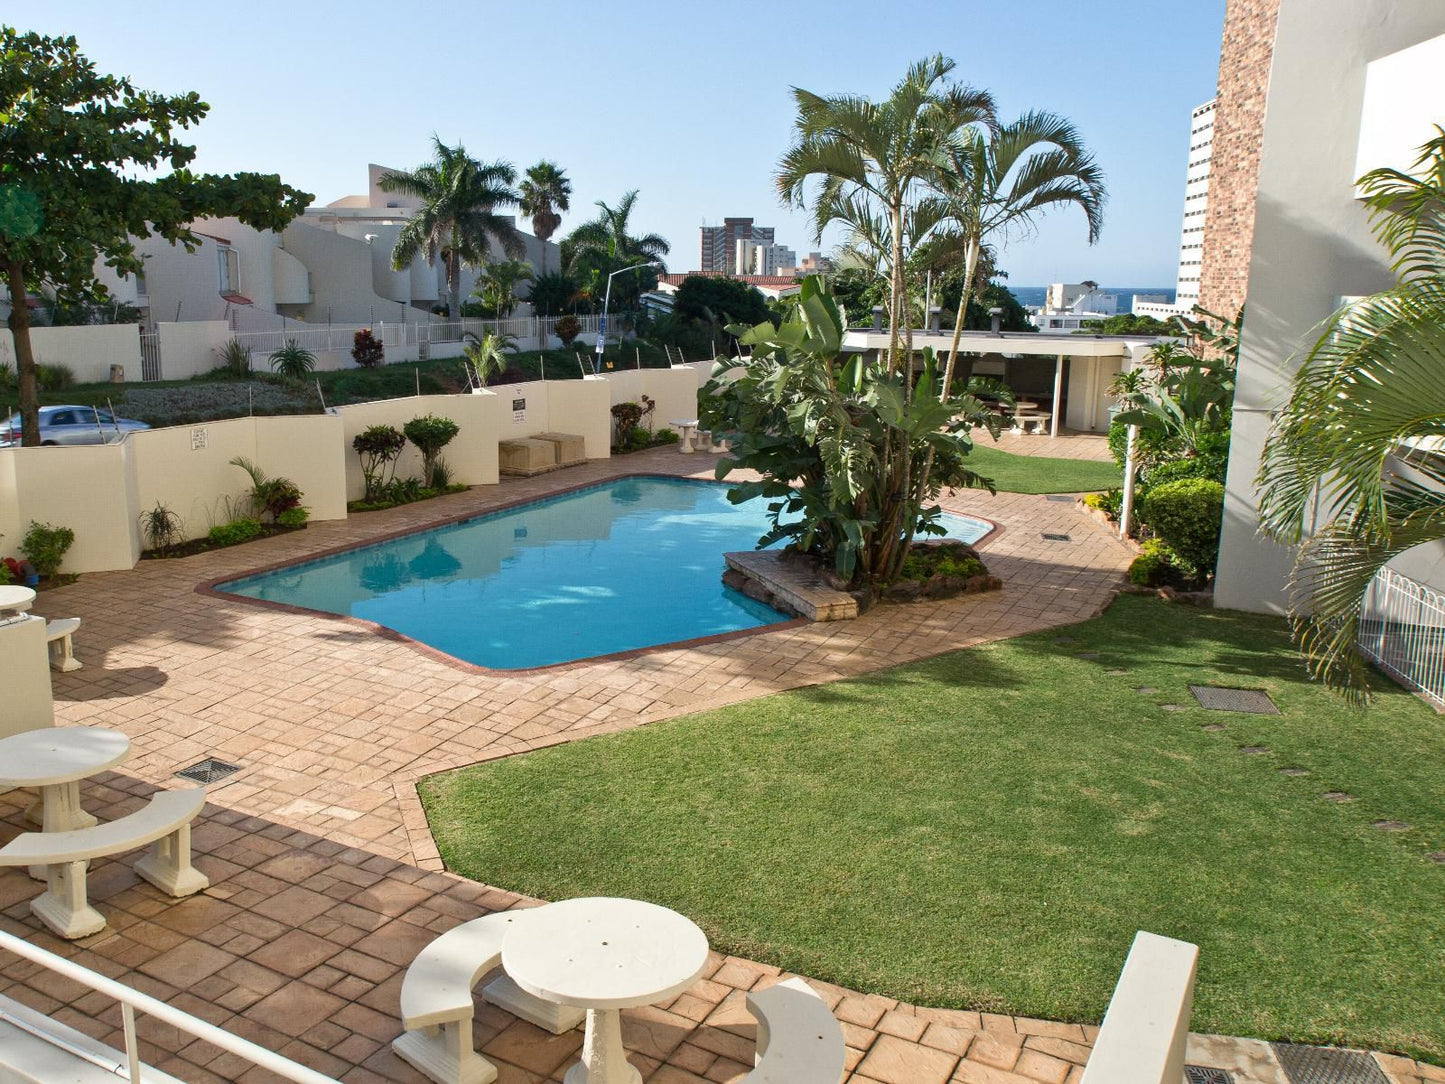 34 Sea Lodge Umhlanga Durban Kwazulu Natal South Africa Complementary Colors, Palm Tree, Plant, Nature, Wood, Garden, Swimming Pool